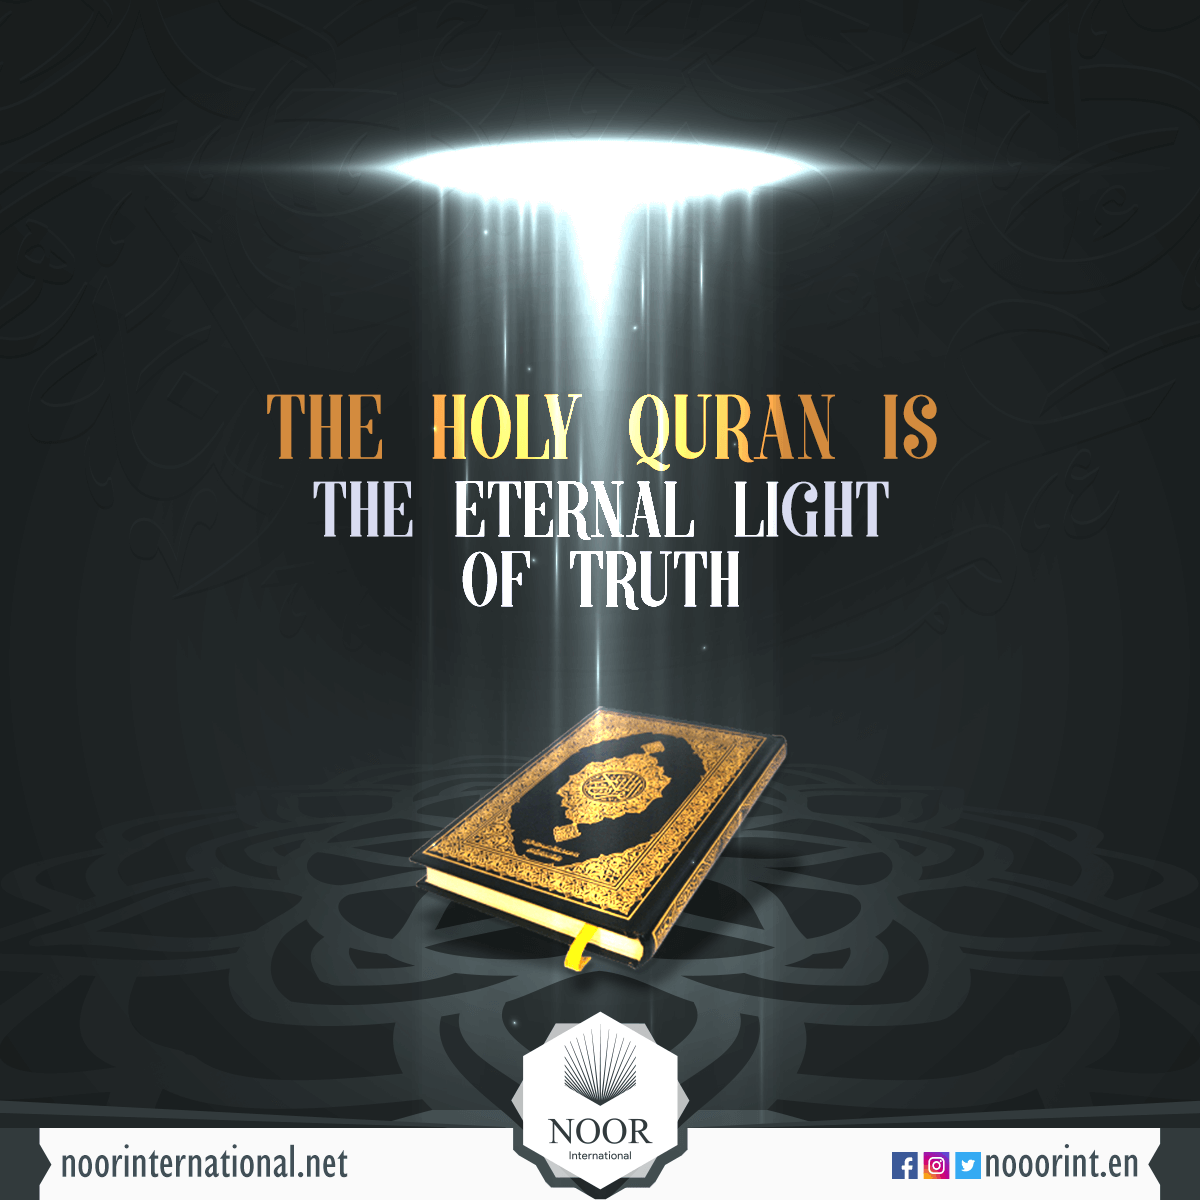 What Did They Say About The Quran?